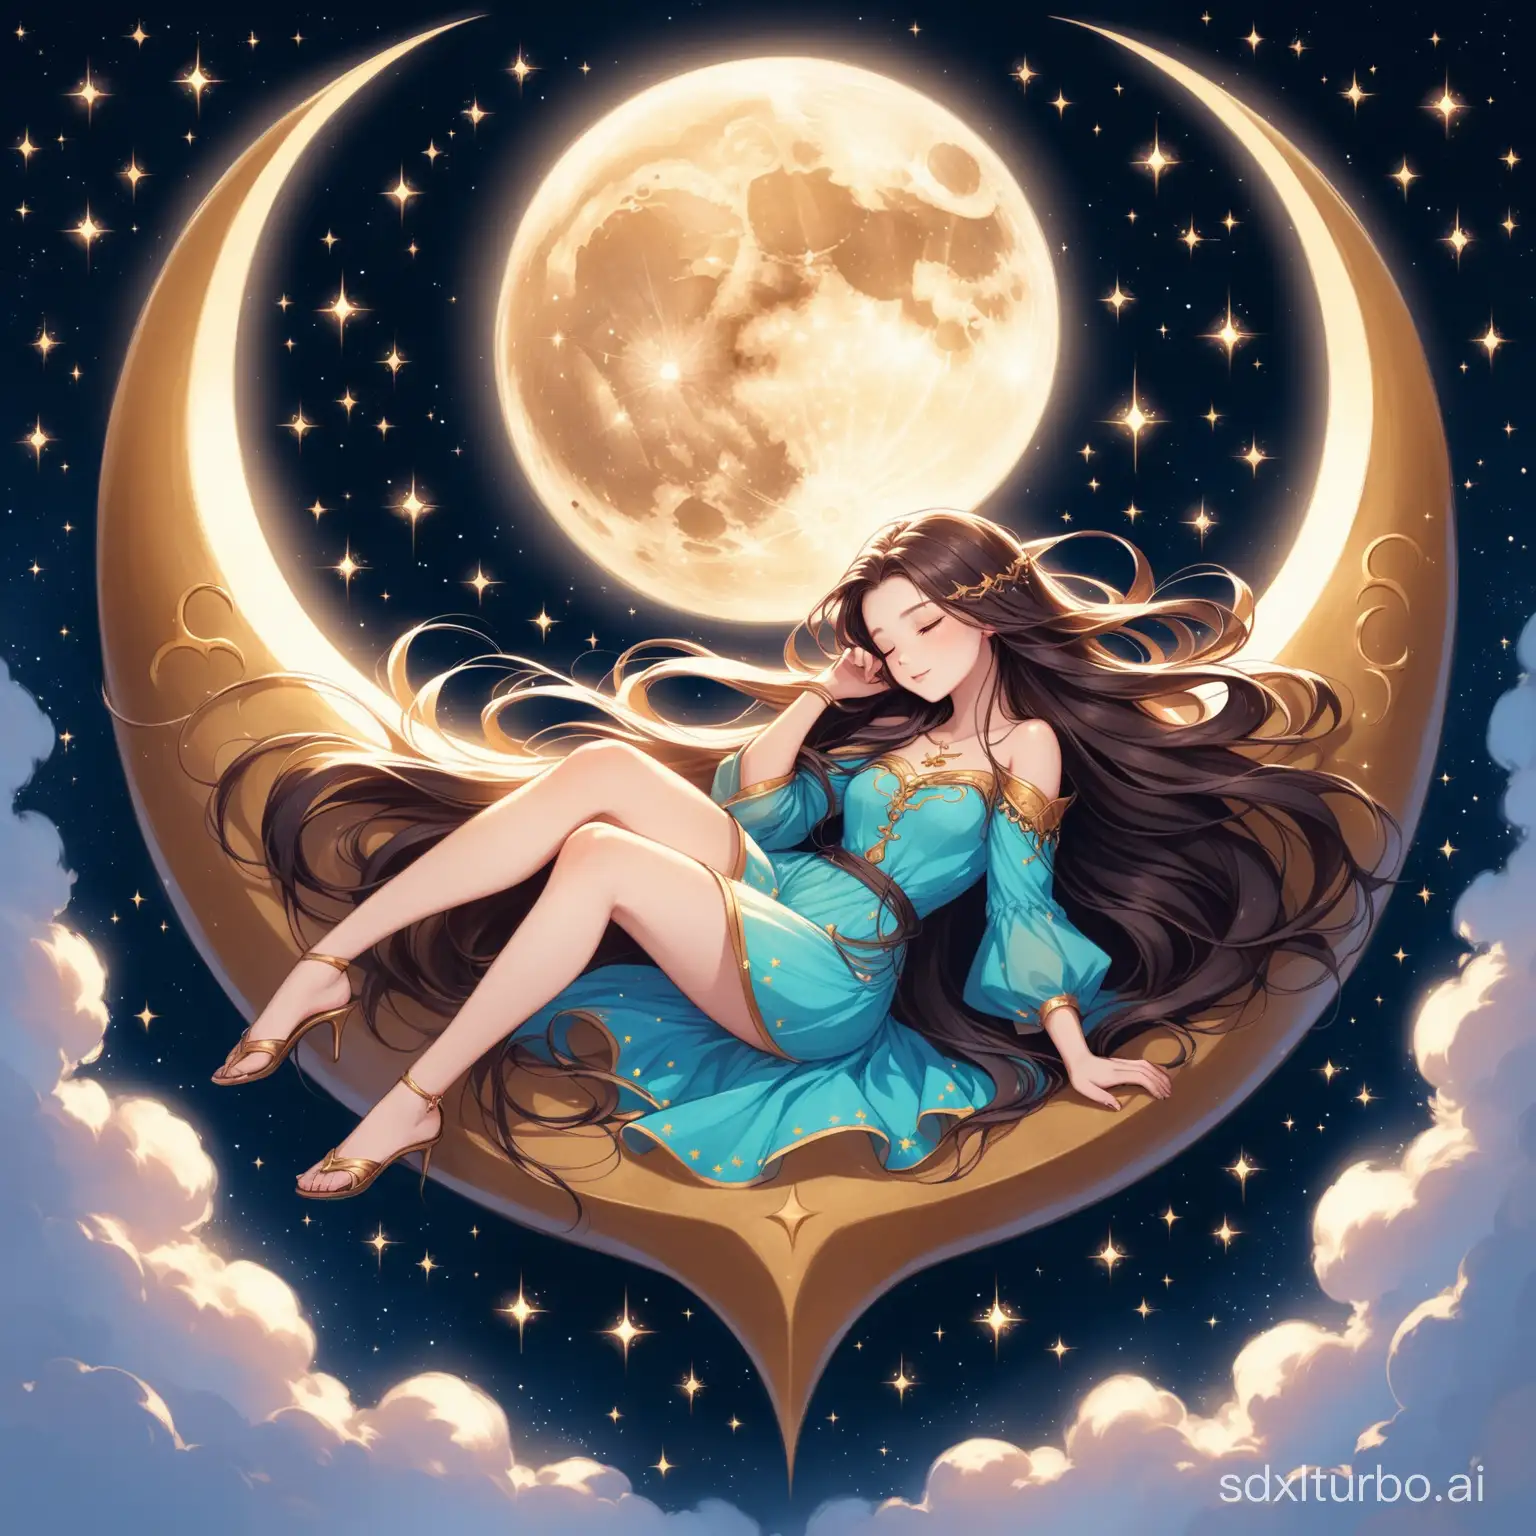 Dreamy-Portrait-of-a-Beautiful-Girl-Laying-in-the-Crescent-Moons-Crest